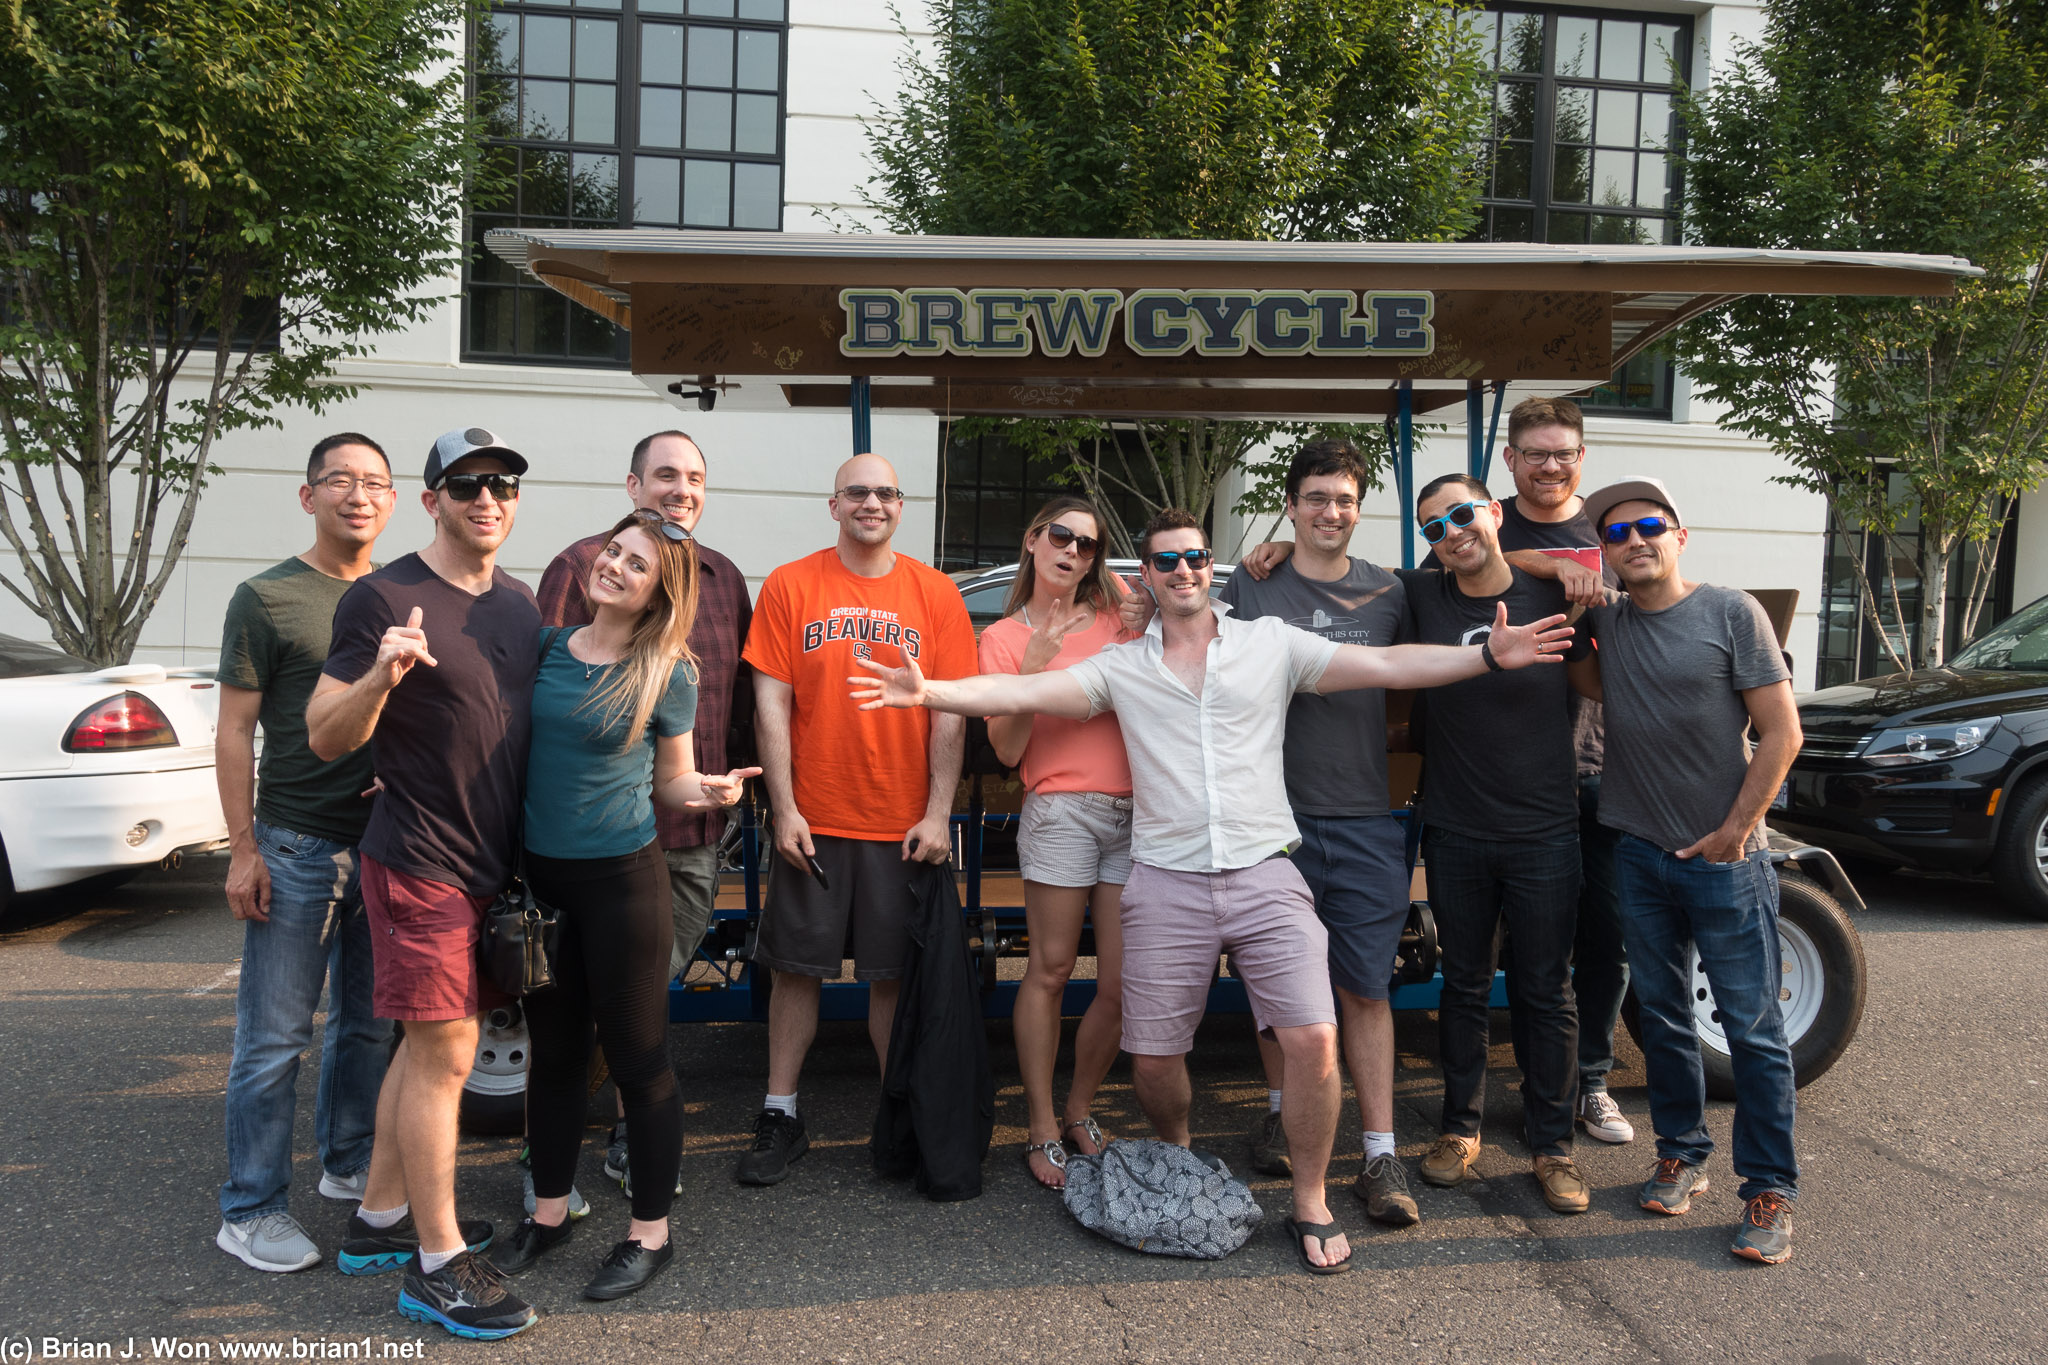 And we're done! Some random Aussies and Kiwis shared the BrewCycle with us.